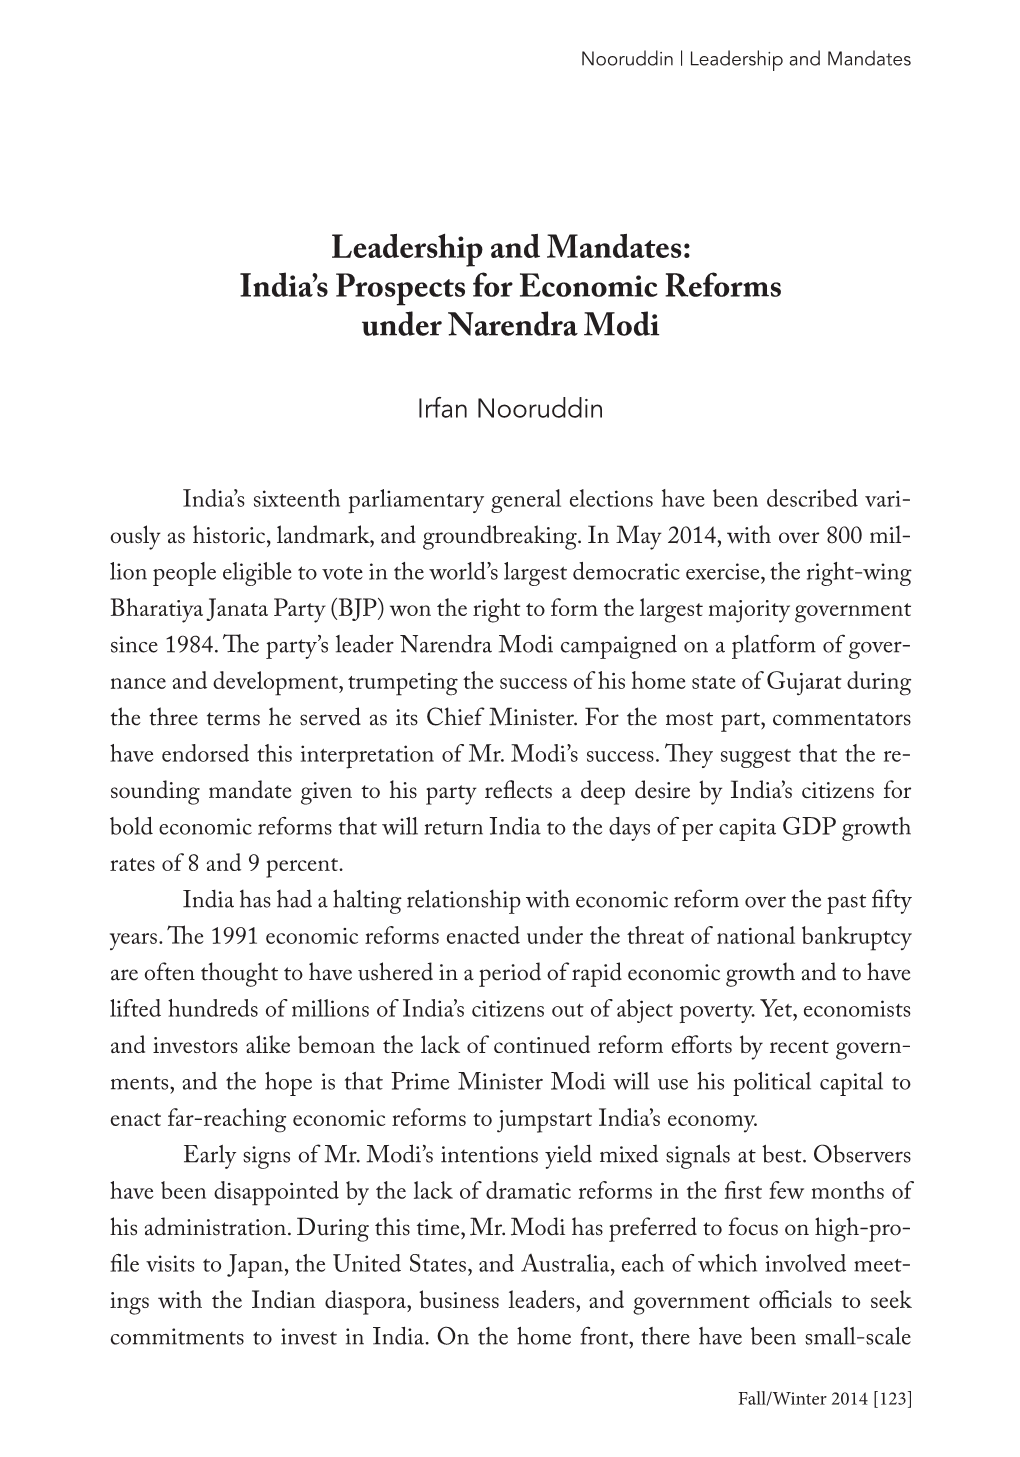 India's Prospects for Economic Reforms